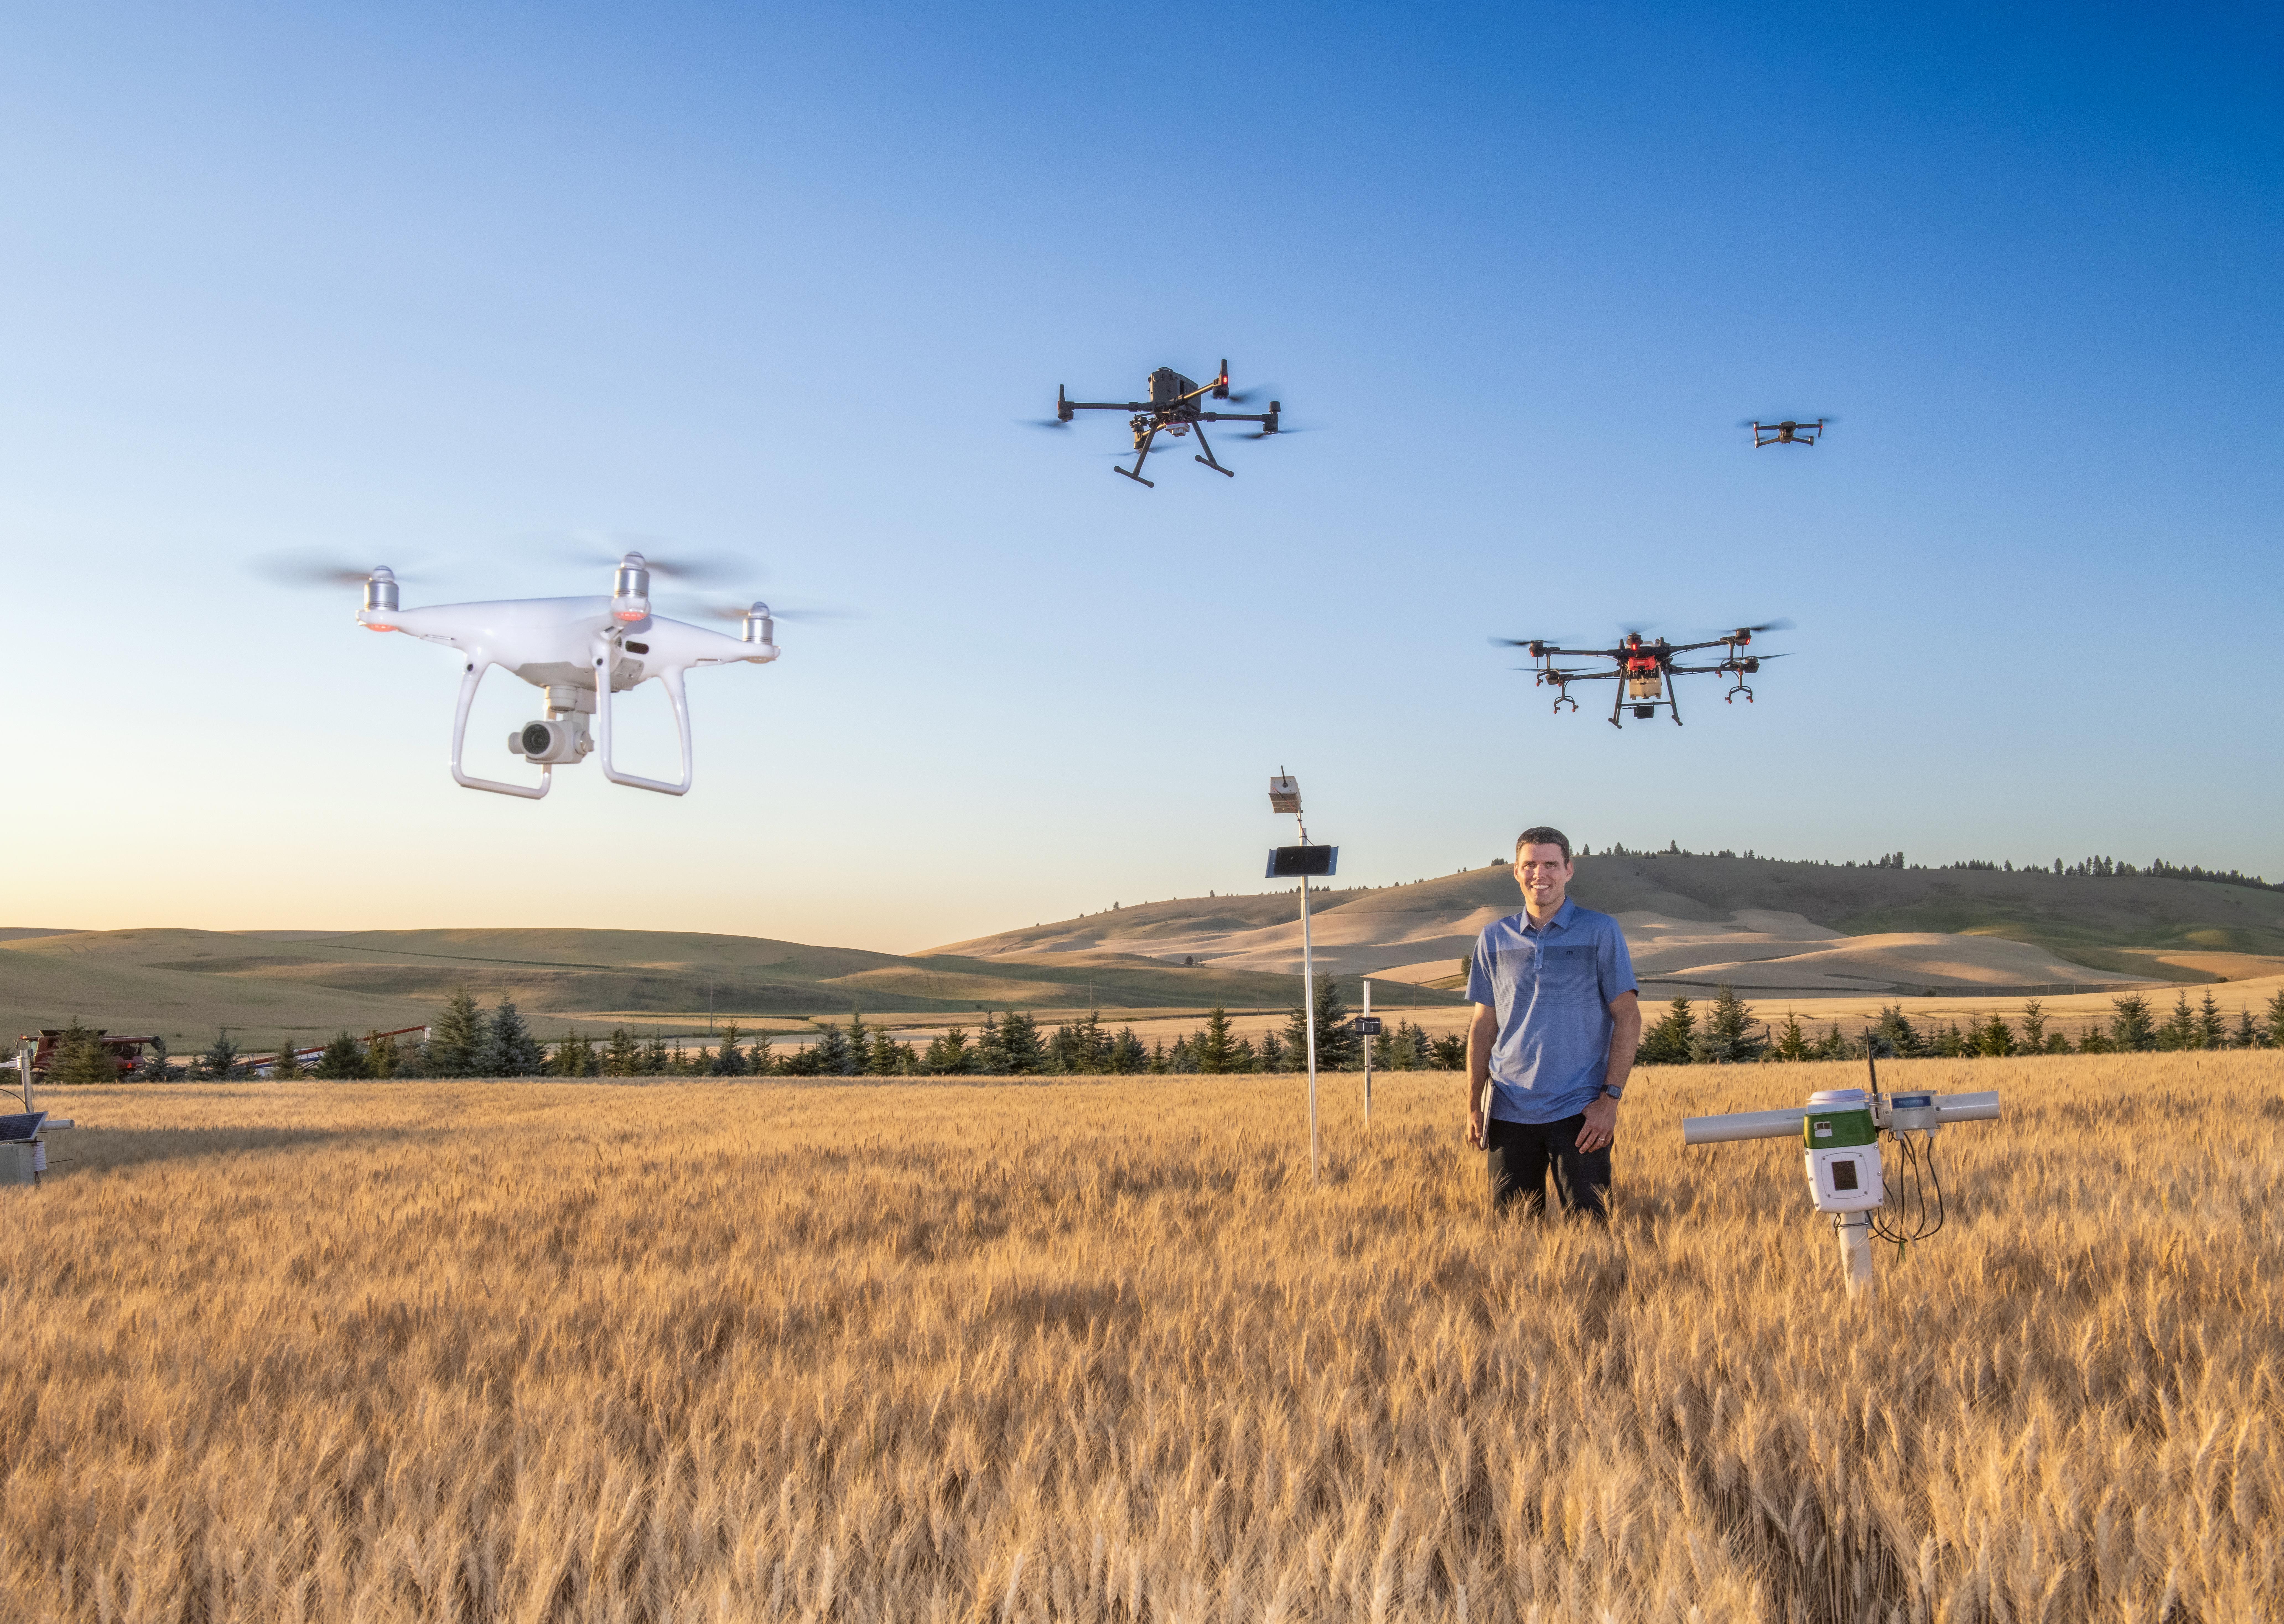 Andrew Nelson, of Farmington, Washington, is a former Microsoft engineer who uses technology on all aspects of his farm, leaning heavily on drones and other advanced sensors. (DTN/Progressive Farmer file photo by Joel Reichenberger)